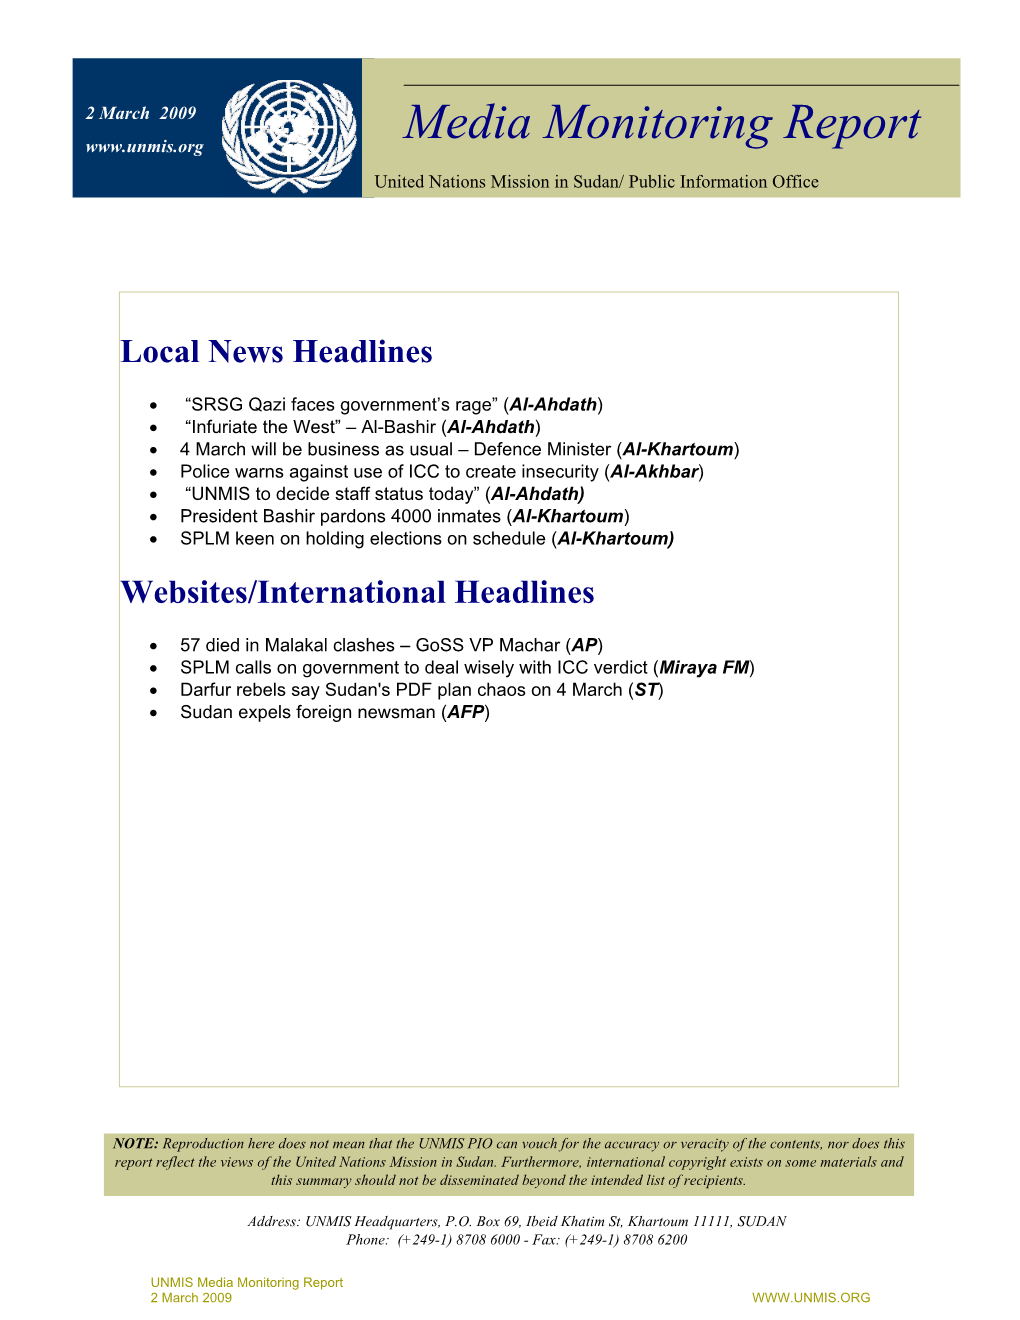 Media Monitoring Report United Nations Mission in Sudan/ Public Information Office